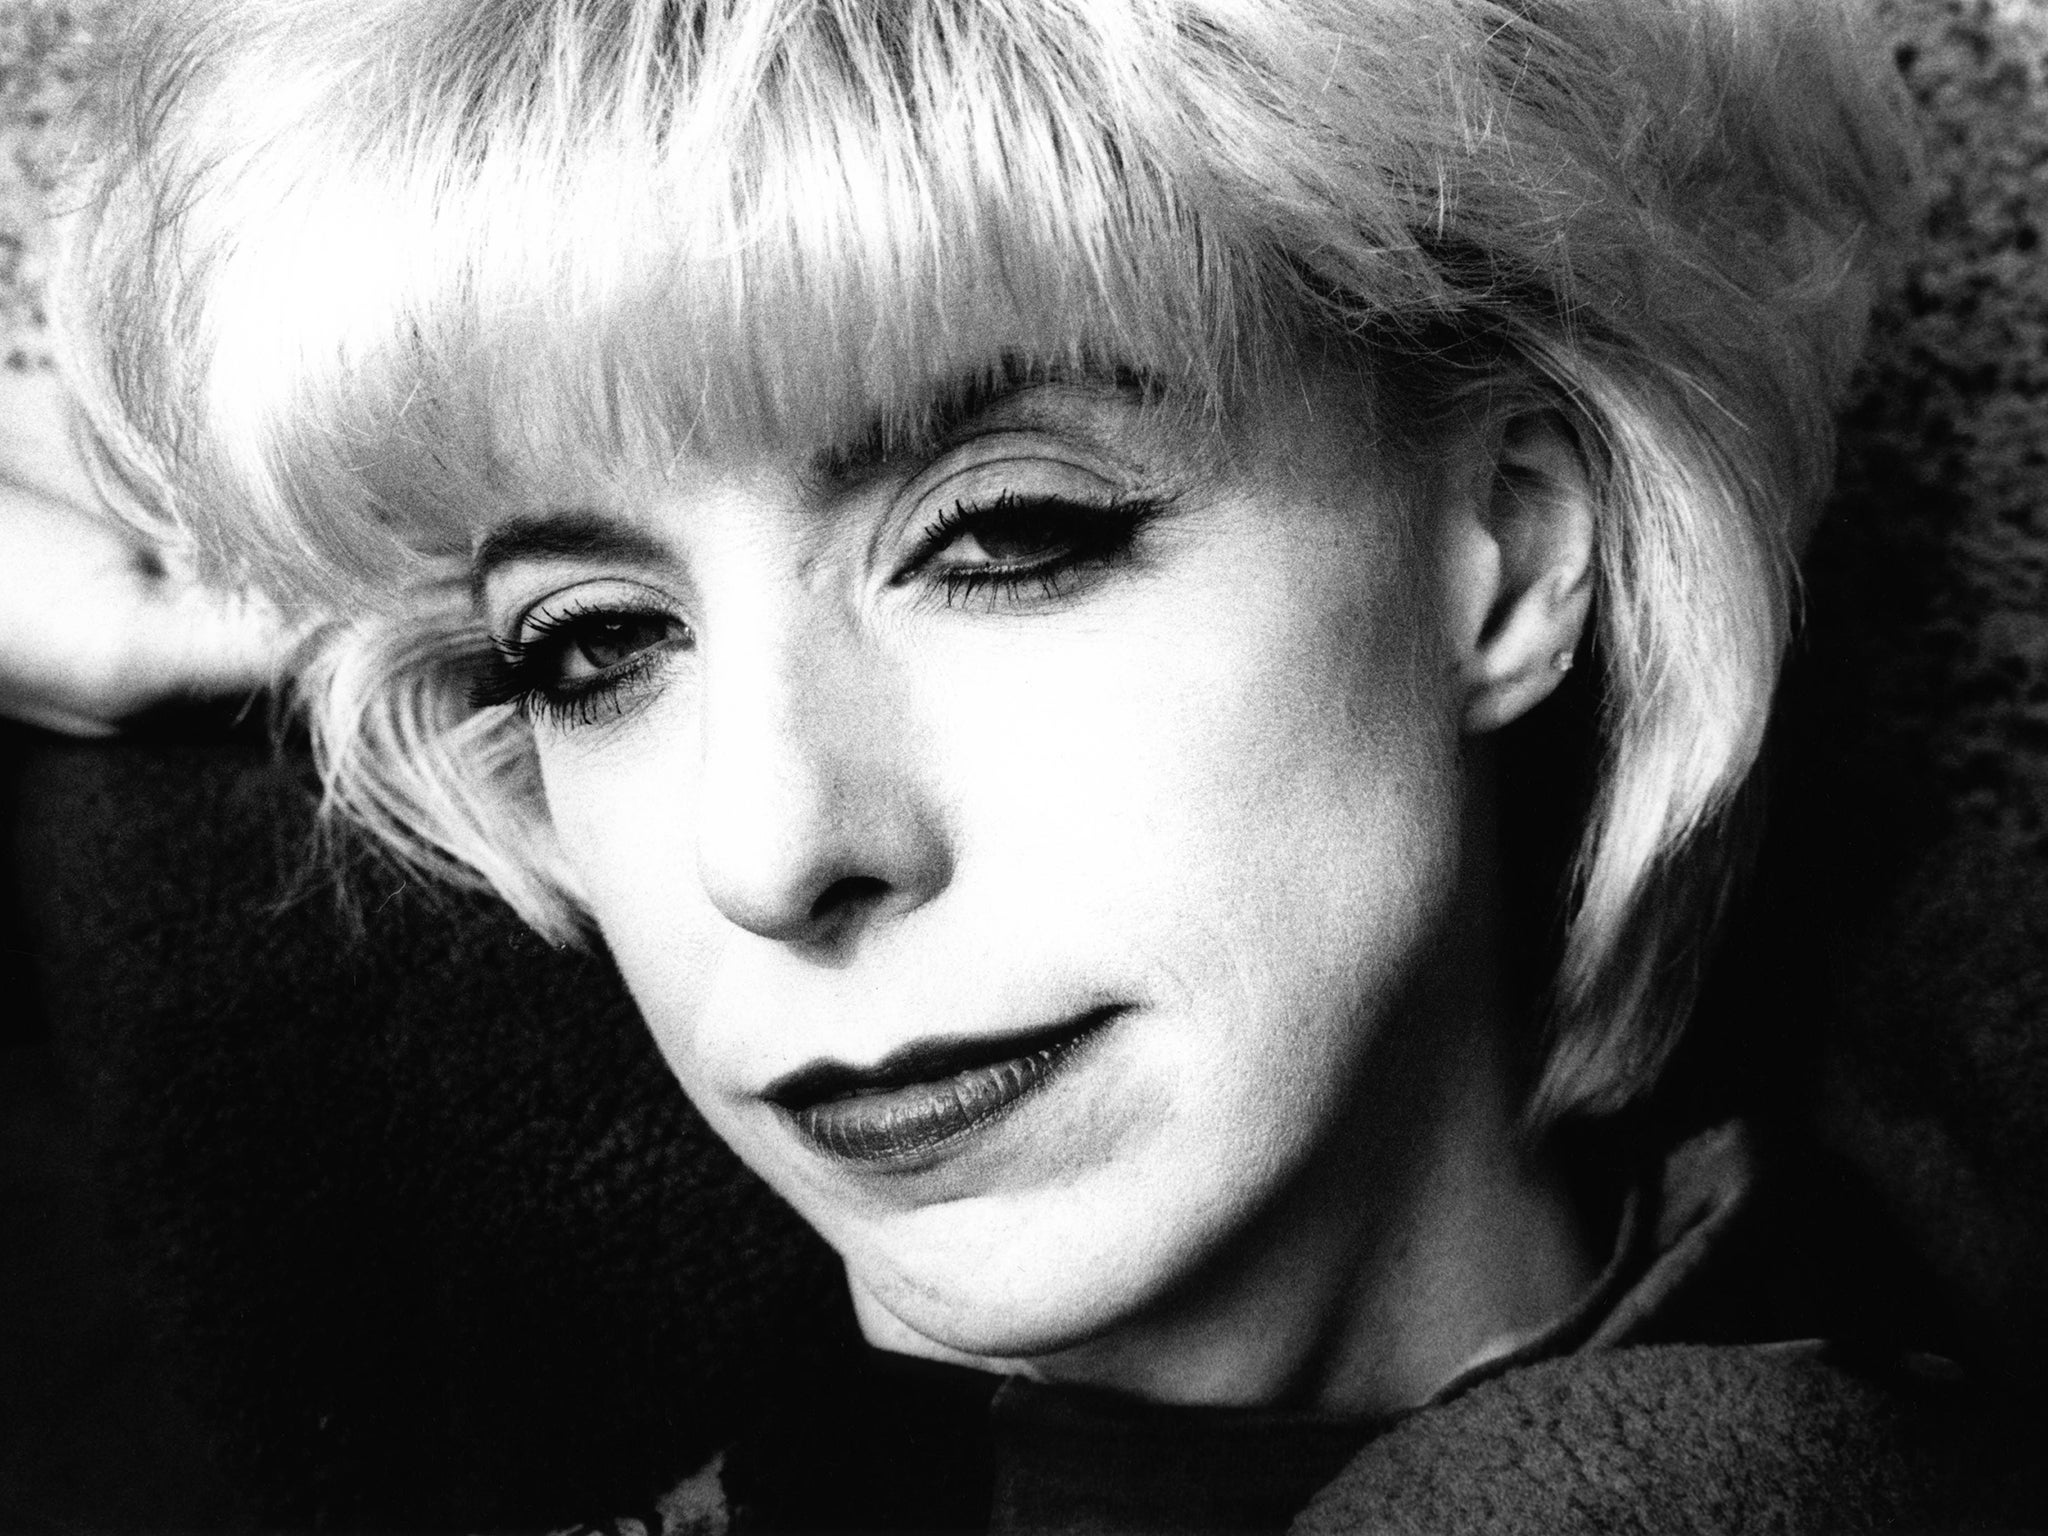 Julee Cruise The whispery voice of David Lynch films The Independent photo